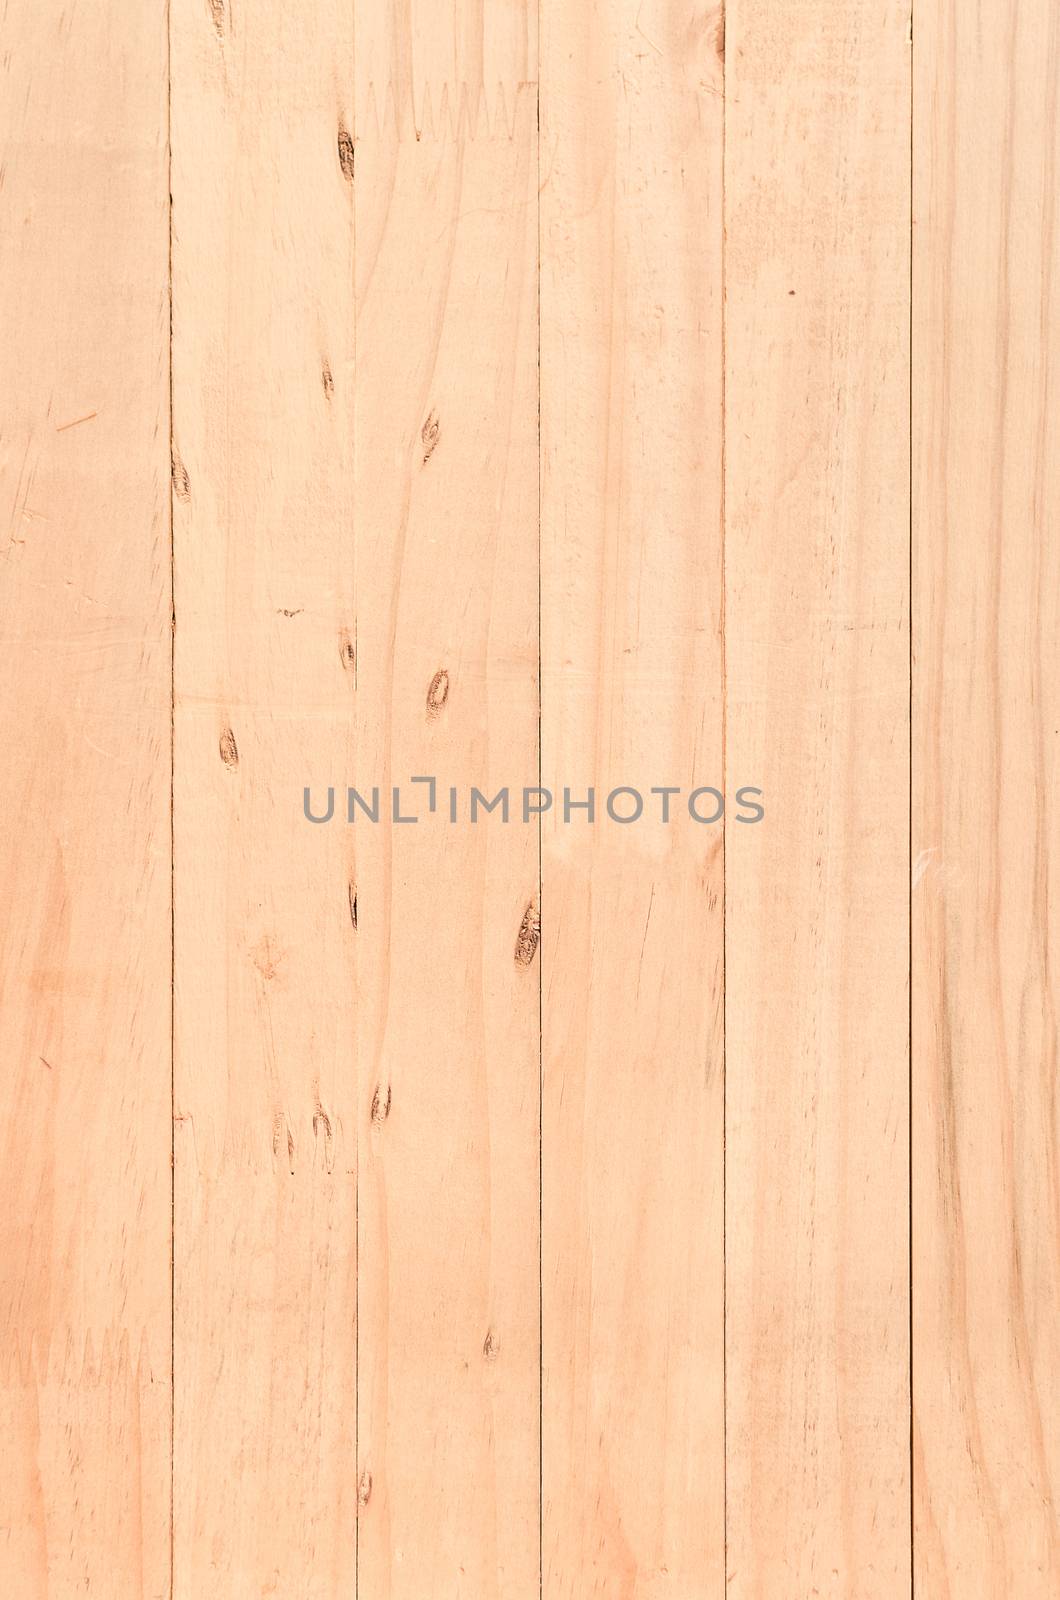 high resolution wood plank brown texture background .